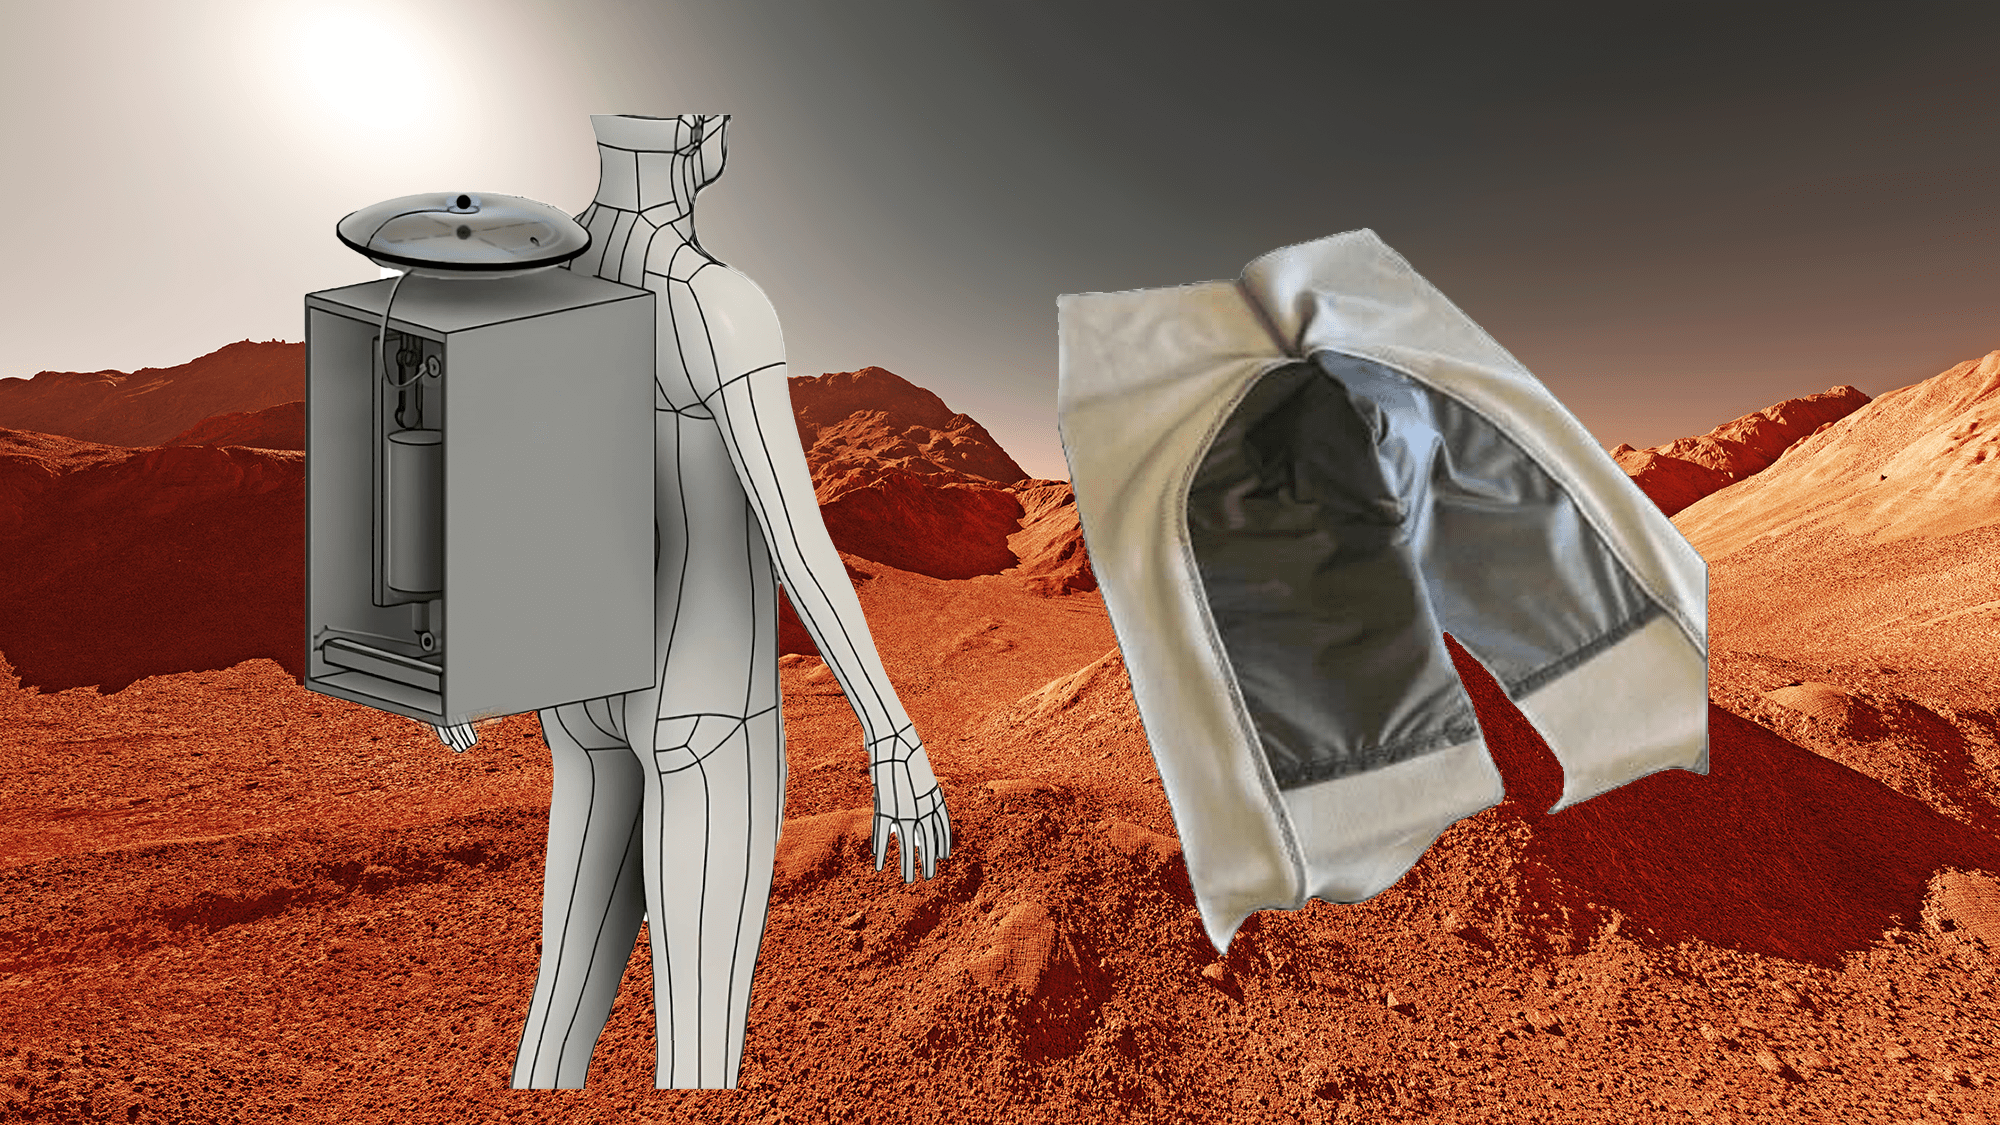 Future astronauts could safely drink their own urine with this Dune-like device